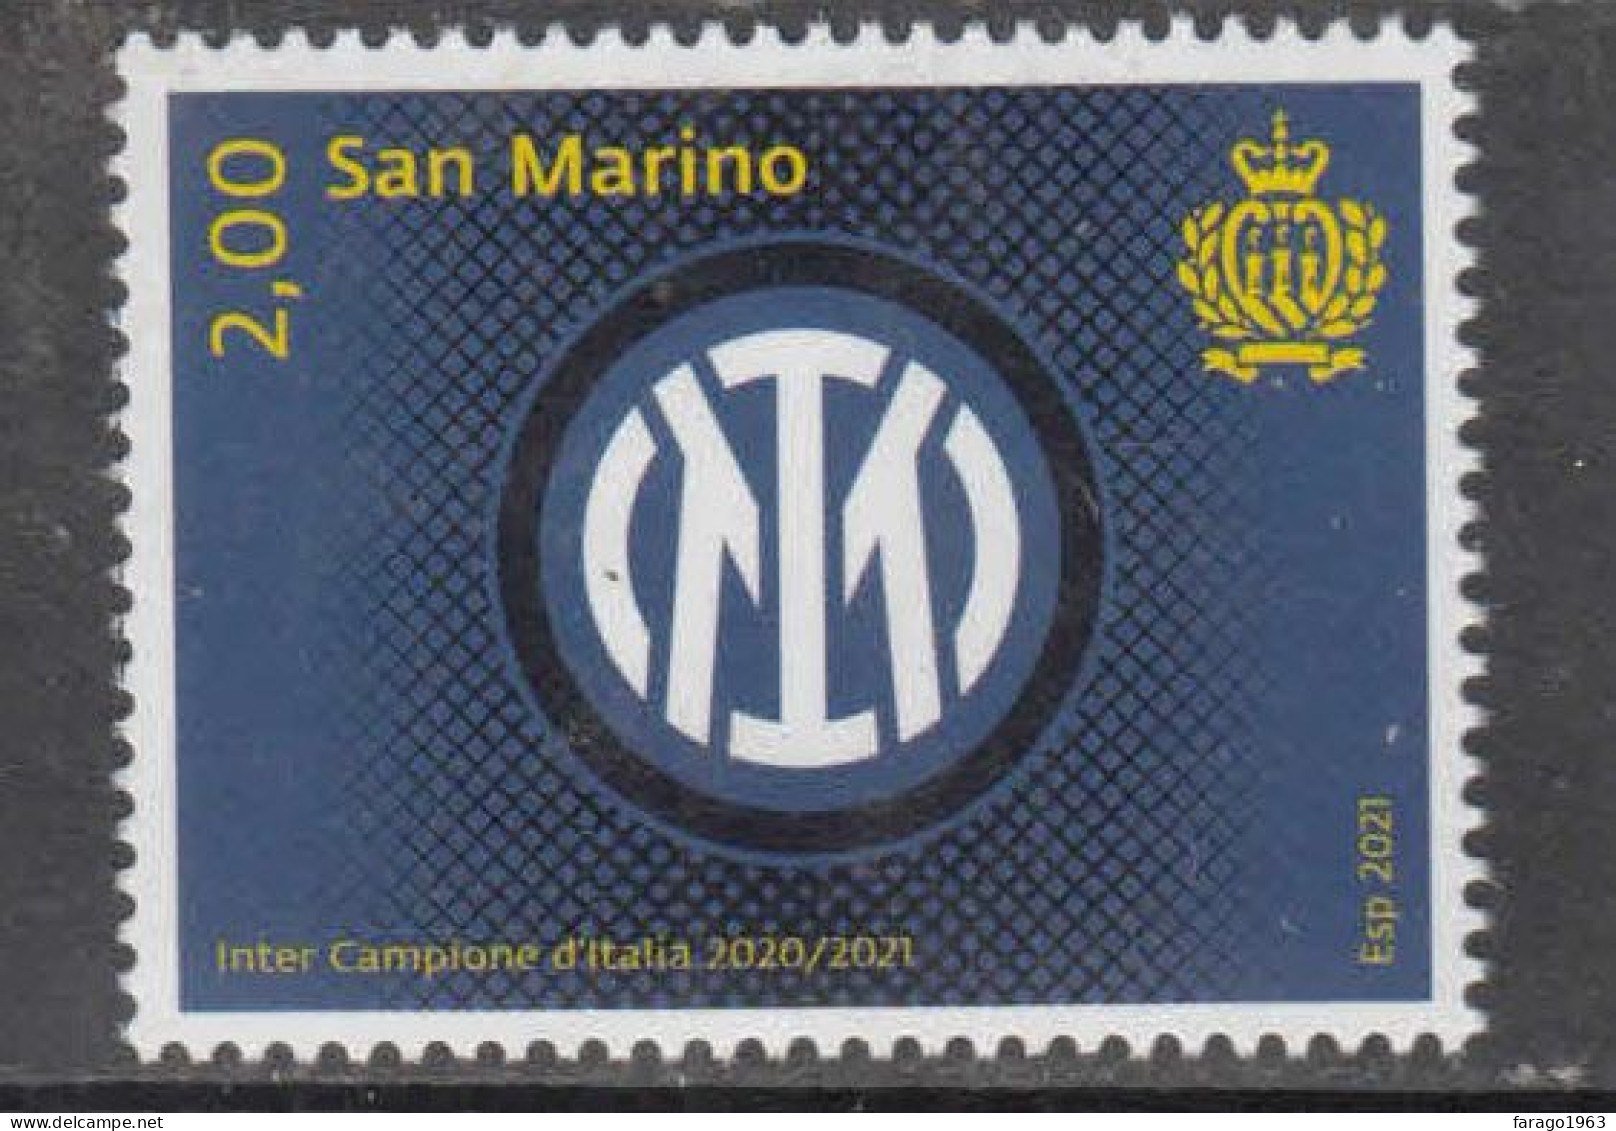 2021 San Marino Football Inter Milan Wins Italy Championship  Complete Set Of 1 MNH @ BELOW FACE VALUE - Unused Stamps